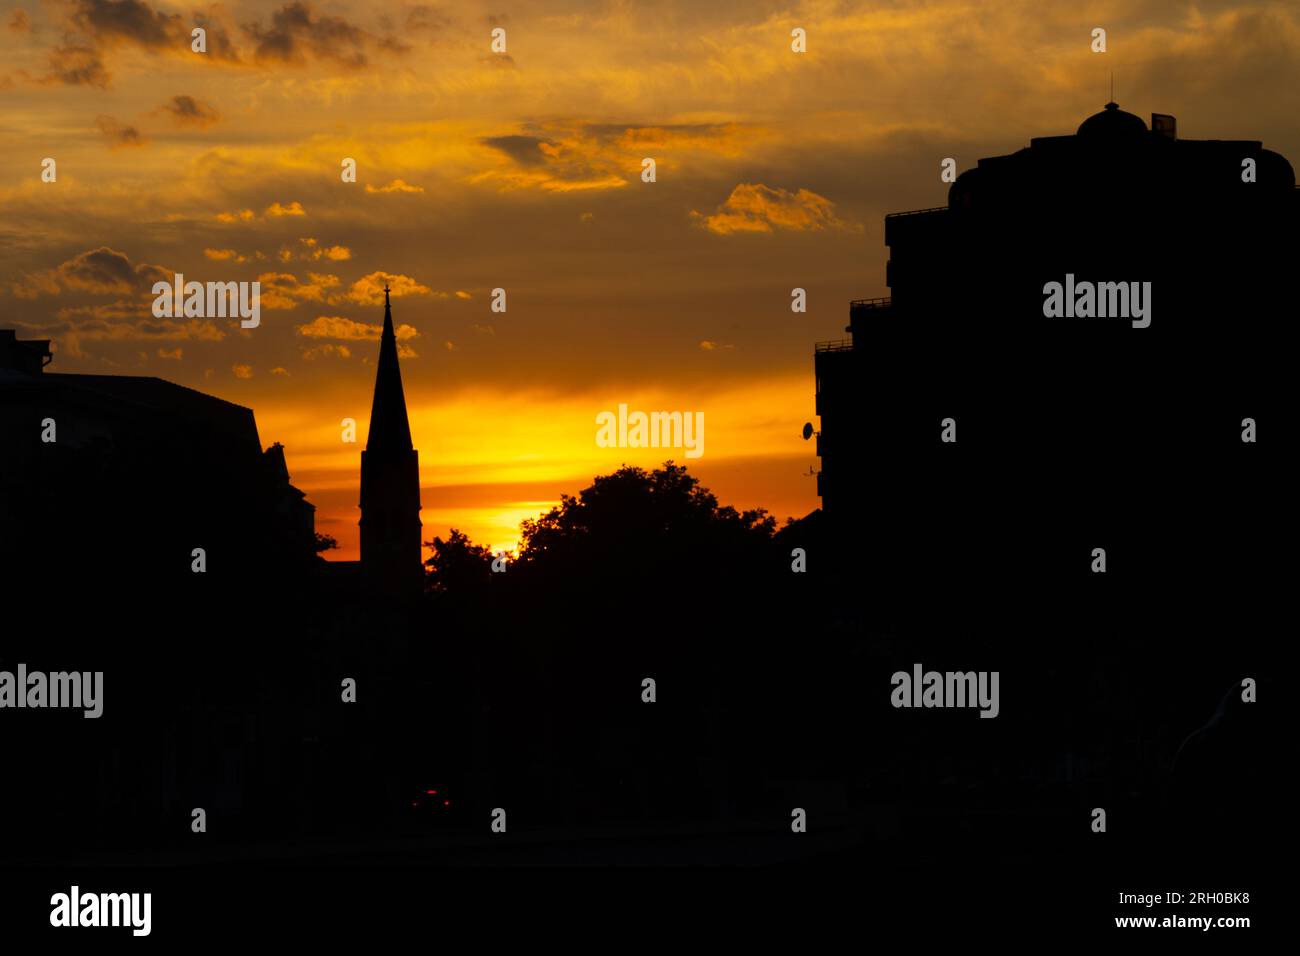 Silhouettes of historical buildings against an orange sky at twilight time in Oradea, Romania Stock Photo